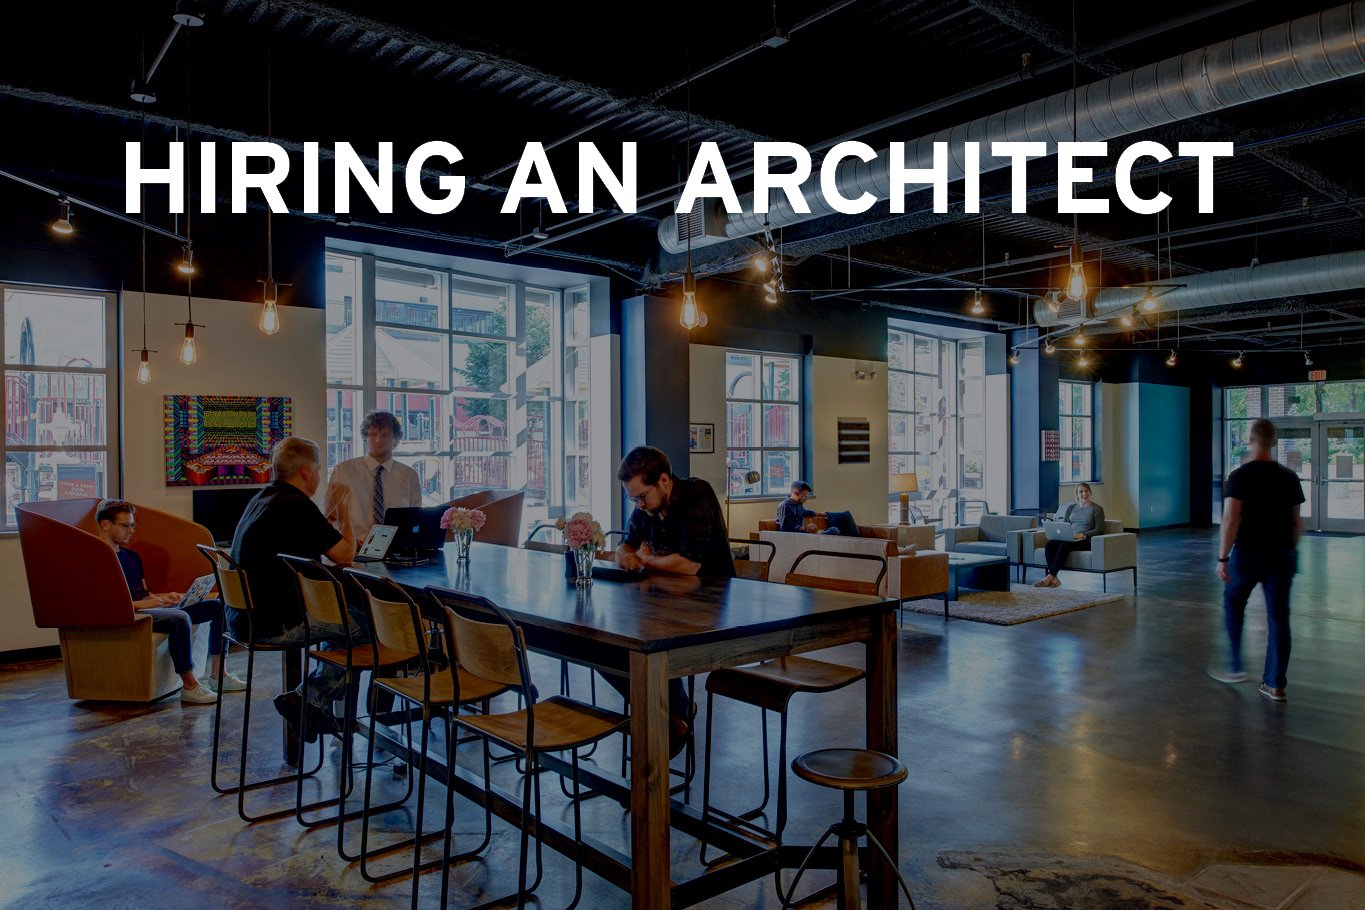 How Do You Hire an Architect? 3 Methods